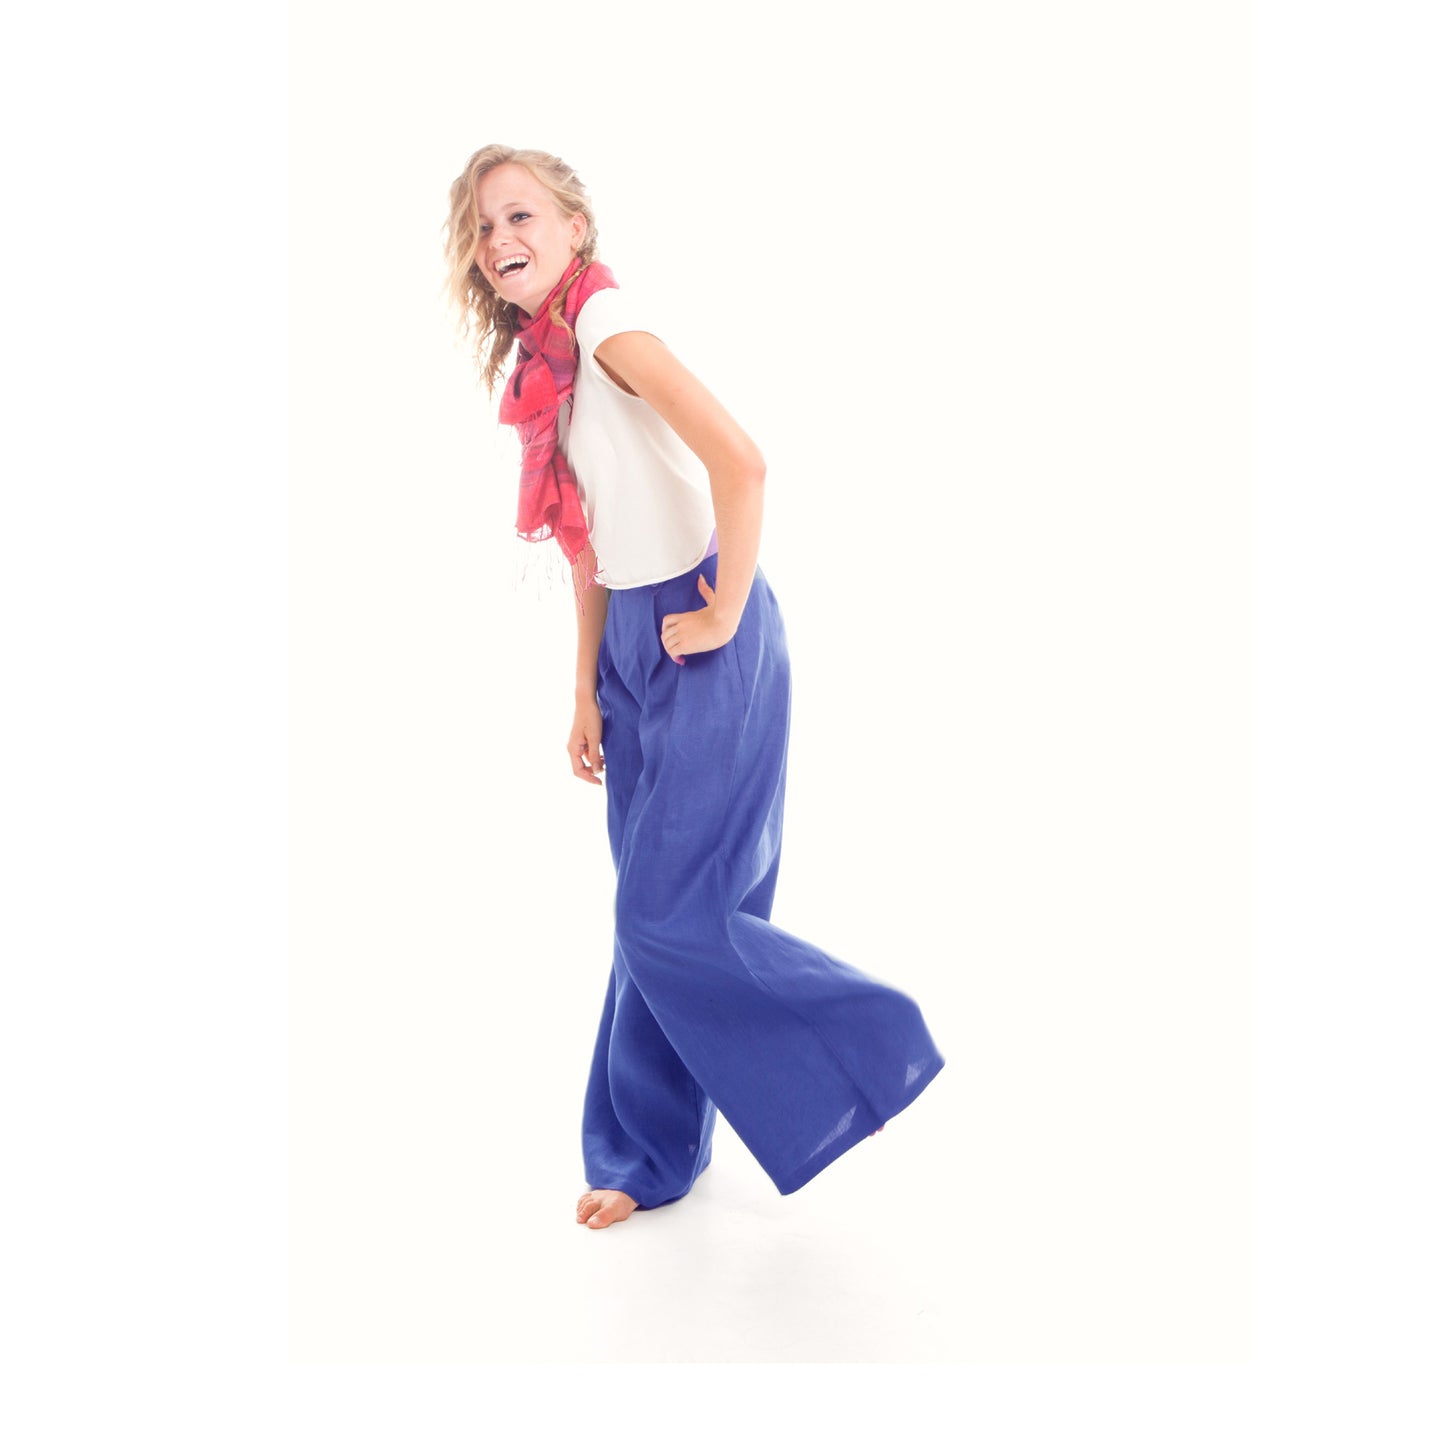 Wide Leg Linen Pants in Royal Blue by Hello My Goddess 